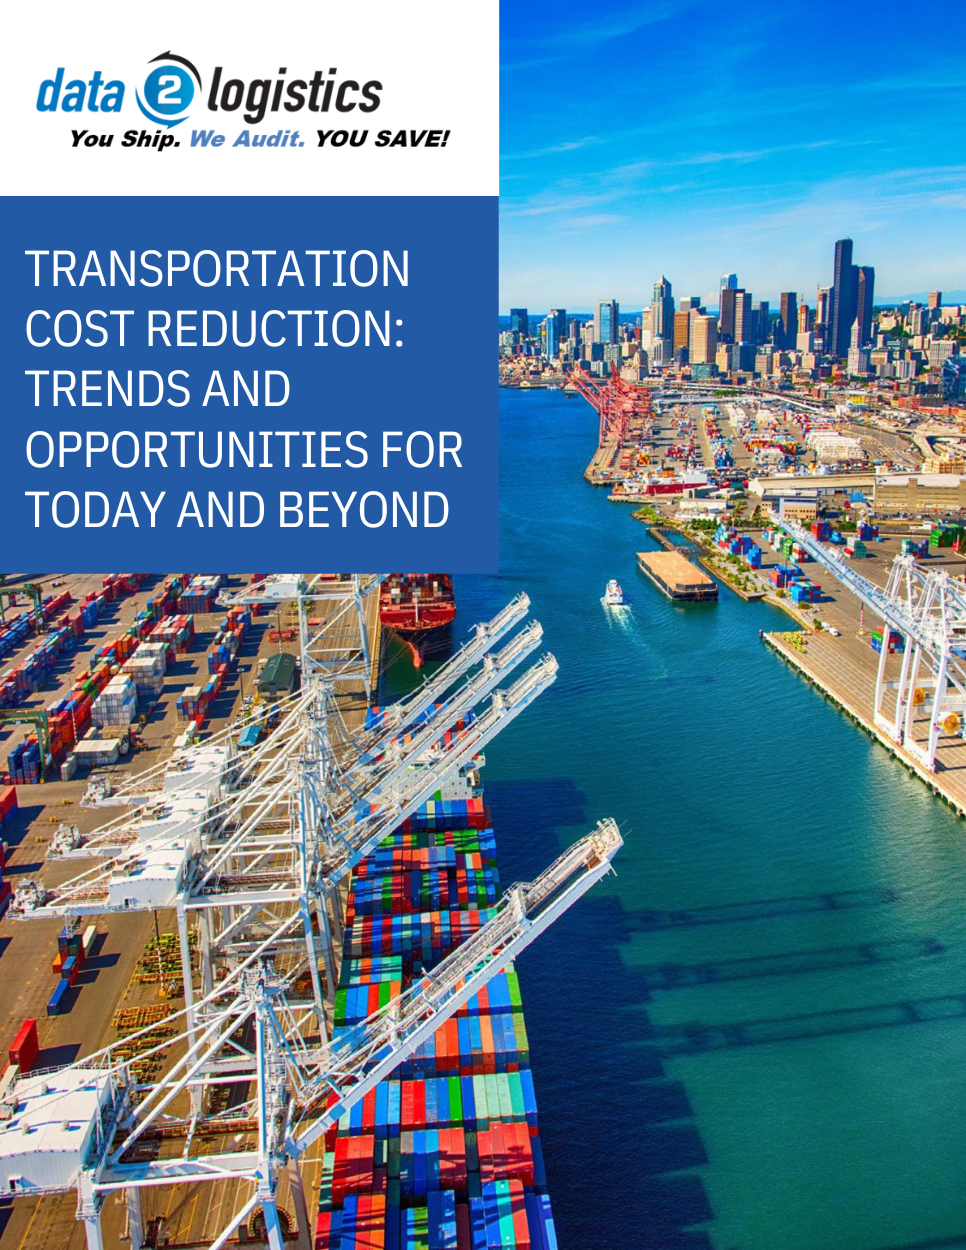 Transportation Cost Reduction: Trends and Opportunities for Today and Beyond